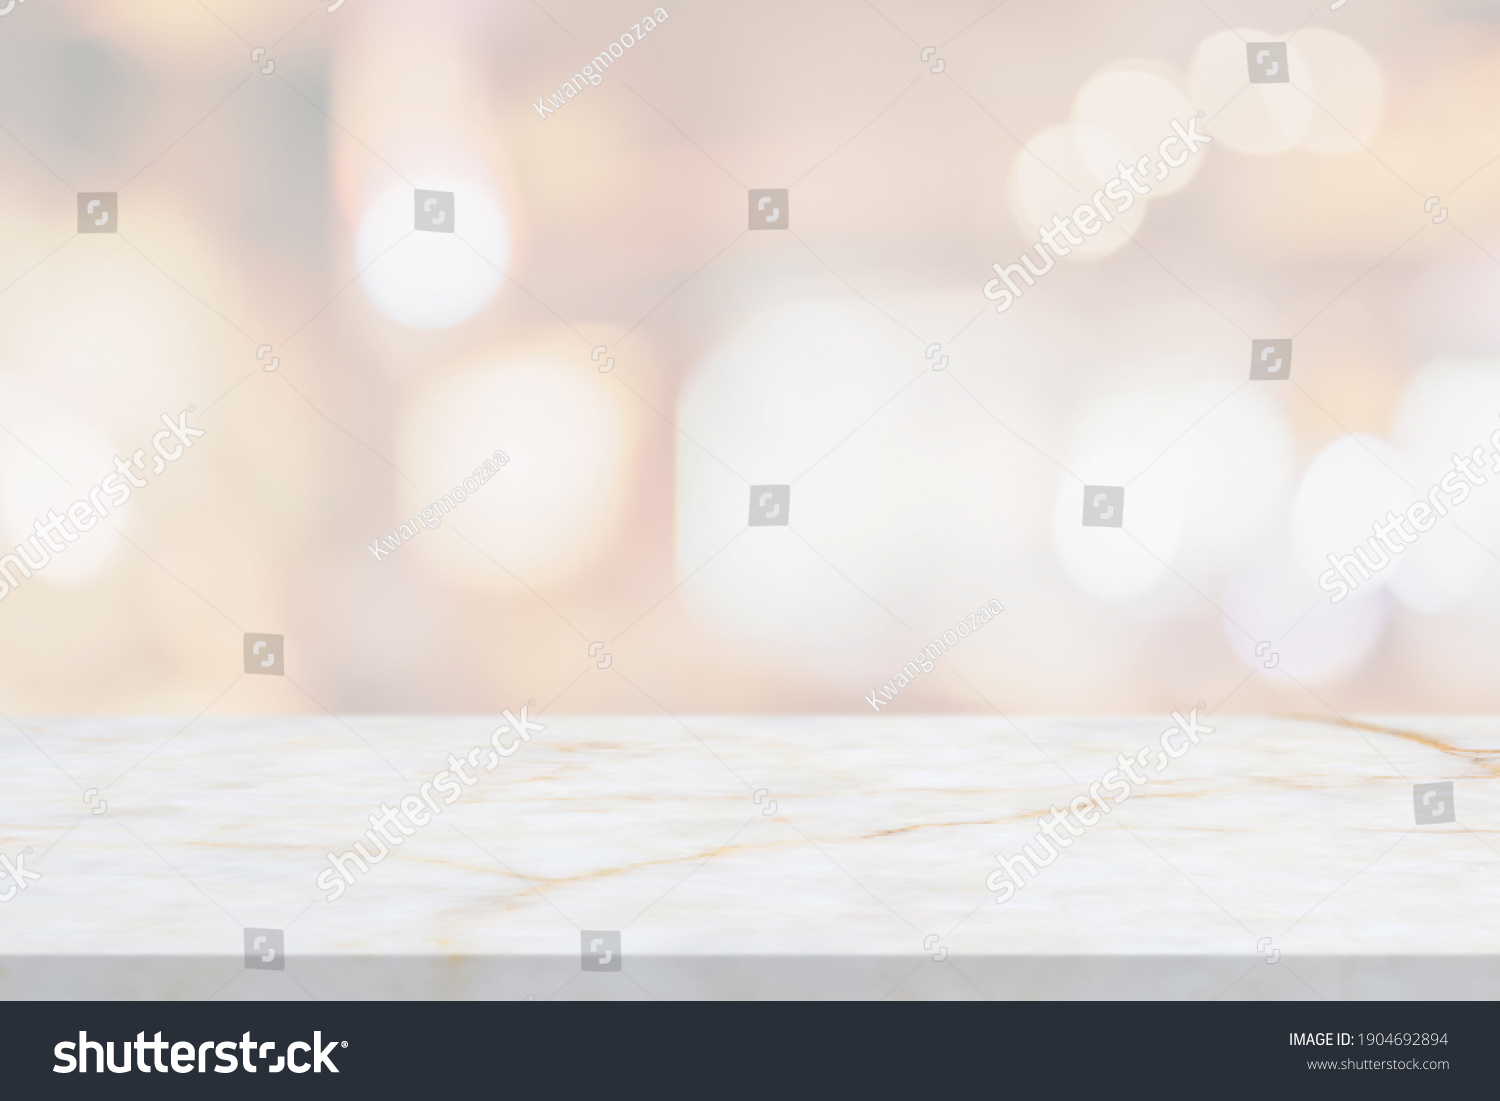 marble table top with blurred abstract cafe restaurant interior background #1904692894